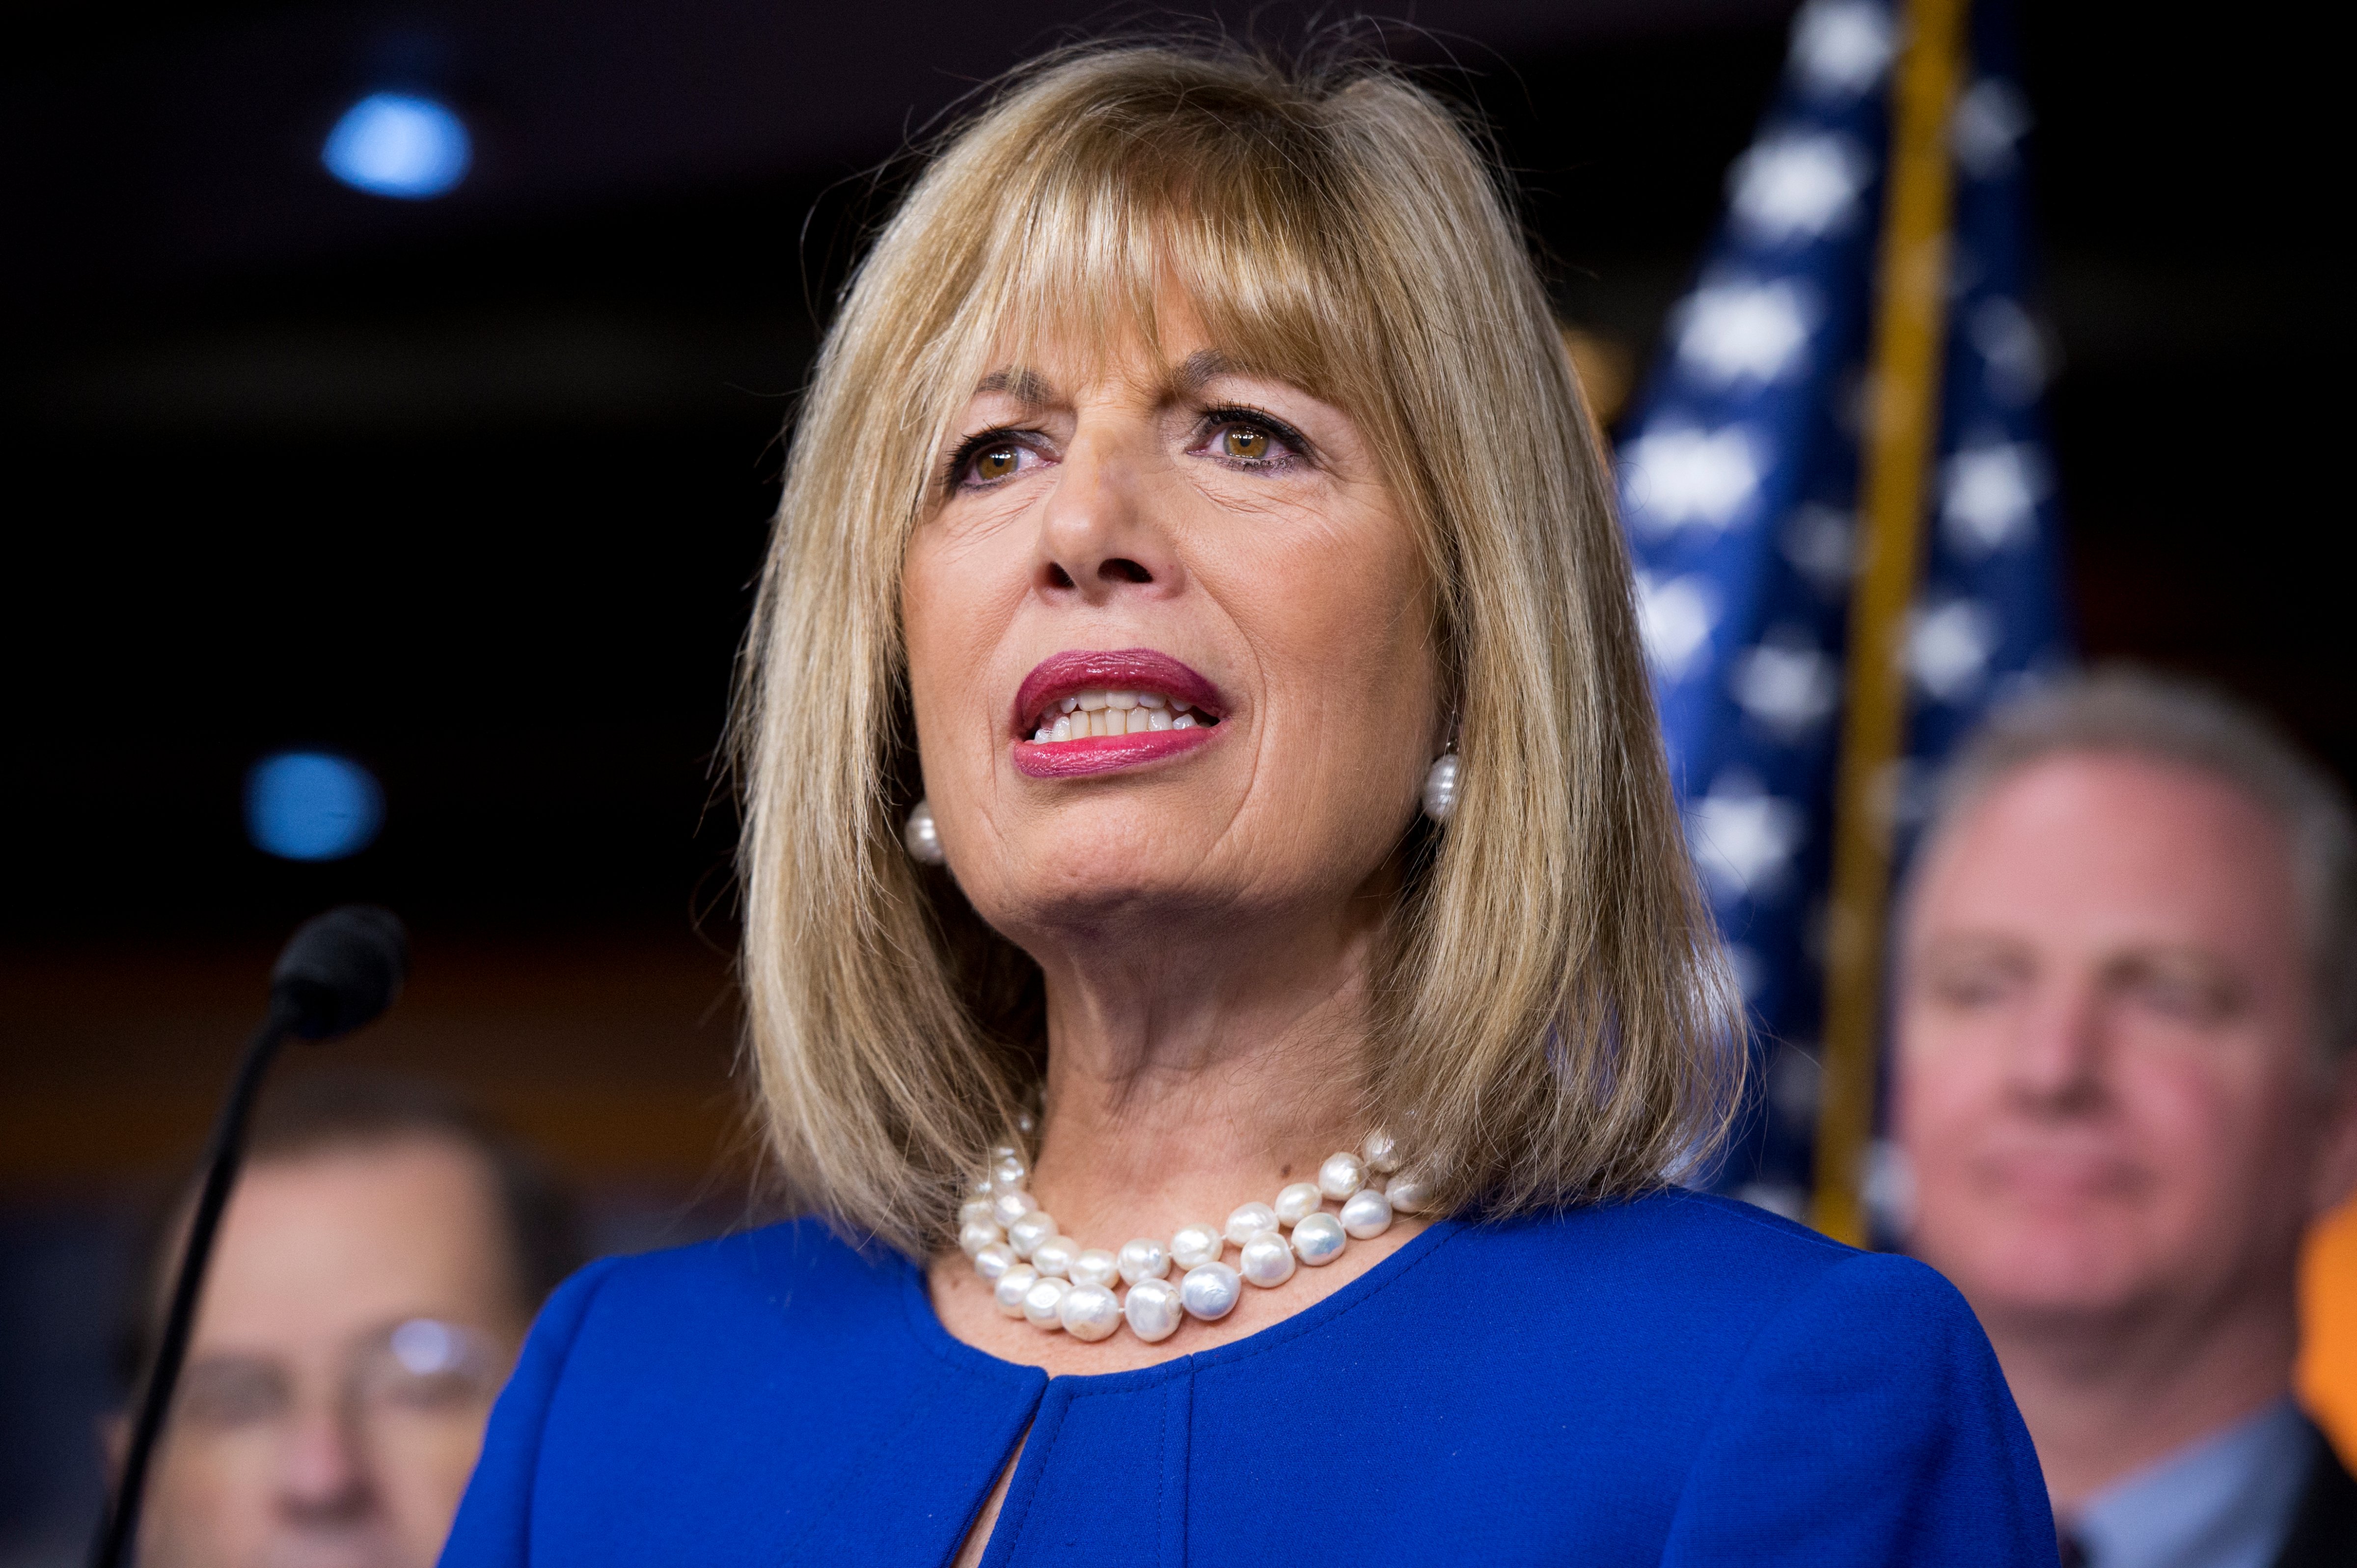 Rep. Jackie Speier, D-Calif., attends a news conference in the Capitol Visitor Center to oppose efforts to defund women's health care, January 6, 2016. (Photo By Tom Williams/CQ Roll Call) (Tom Williams—CQ-Roll Call,Inc.)